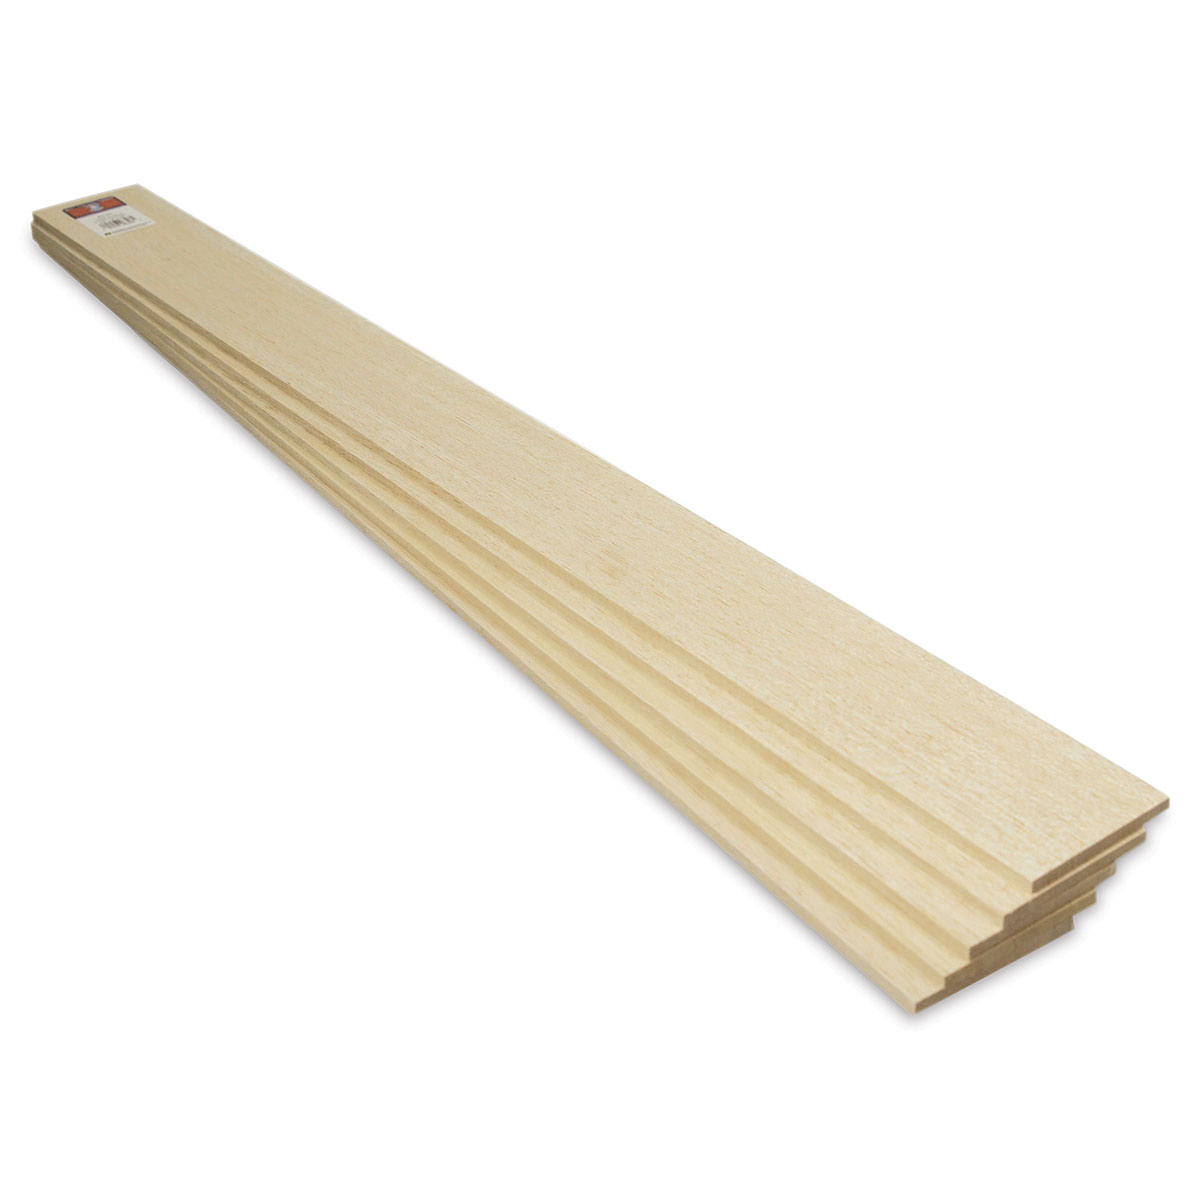 Midwest Products Balsa Wood Strips - 30 Pieces, 1/8'' x 1/4'' x 36